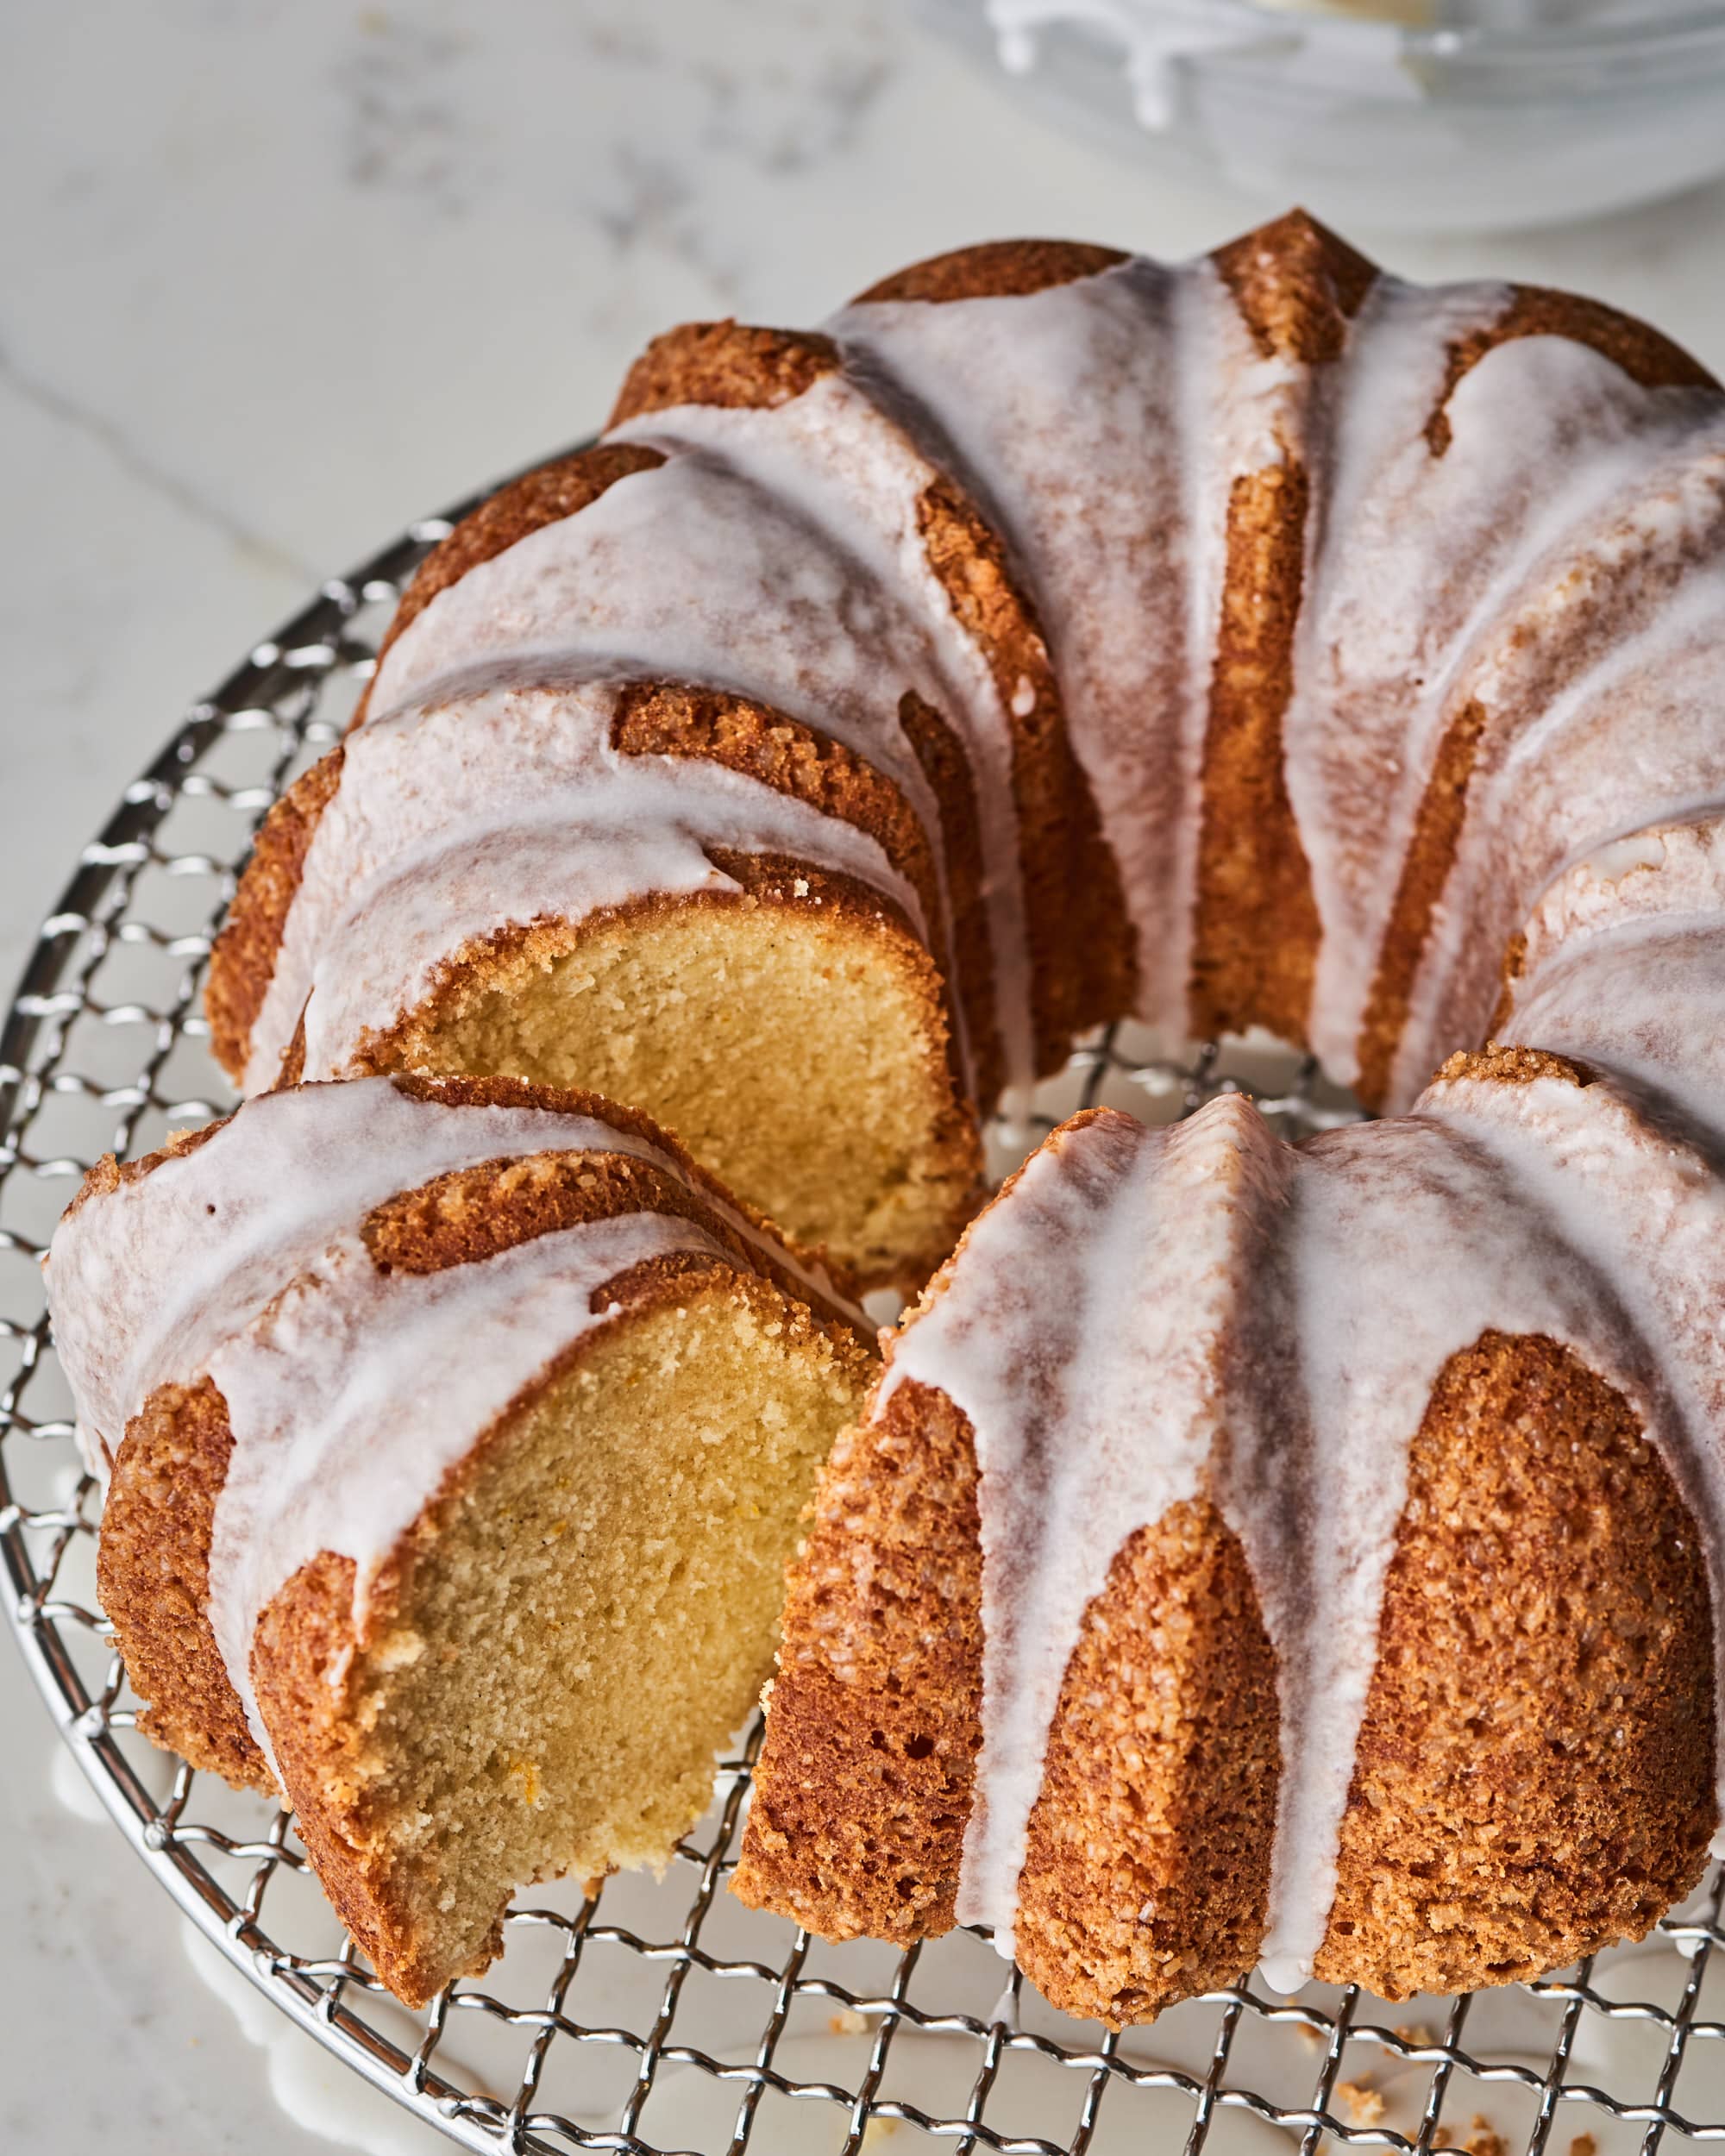 https://cdn.apartmenttherapy.info/image/upload/v1583185813/k/Photo/Recipes/2020-03-How-to-Ultimate-Foolproof-Bundt/2020-02-24_AT-K_104583.jpg